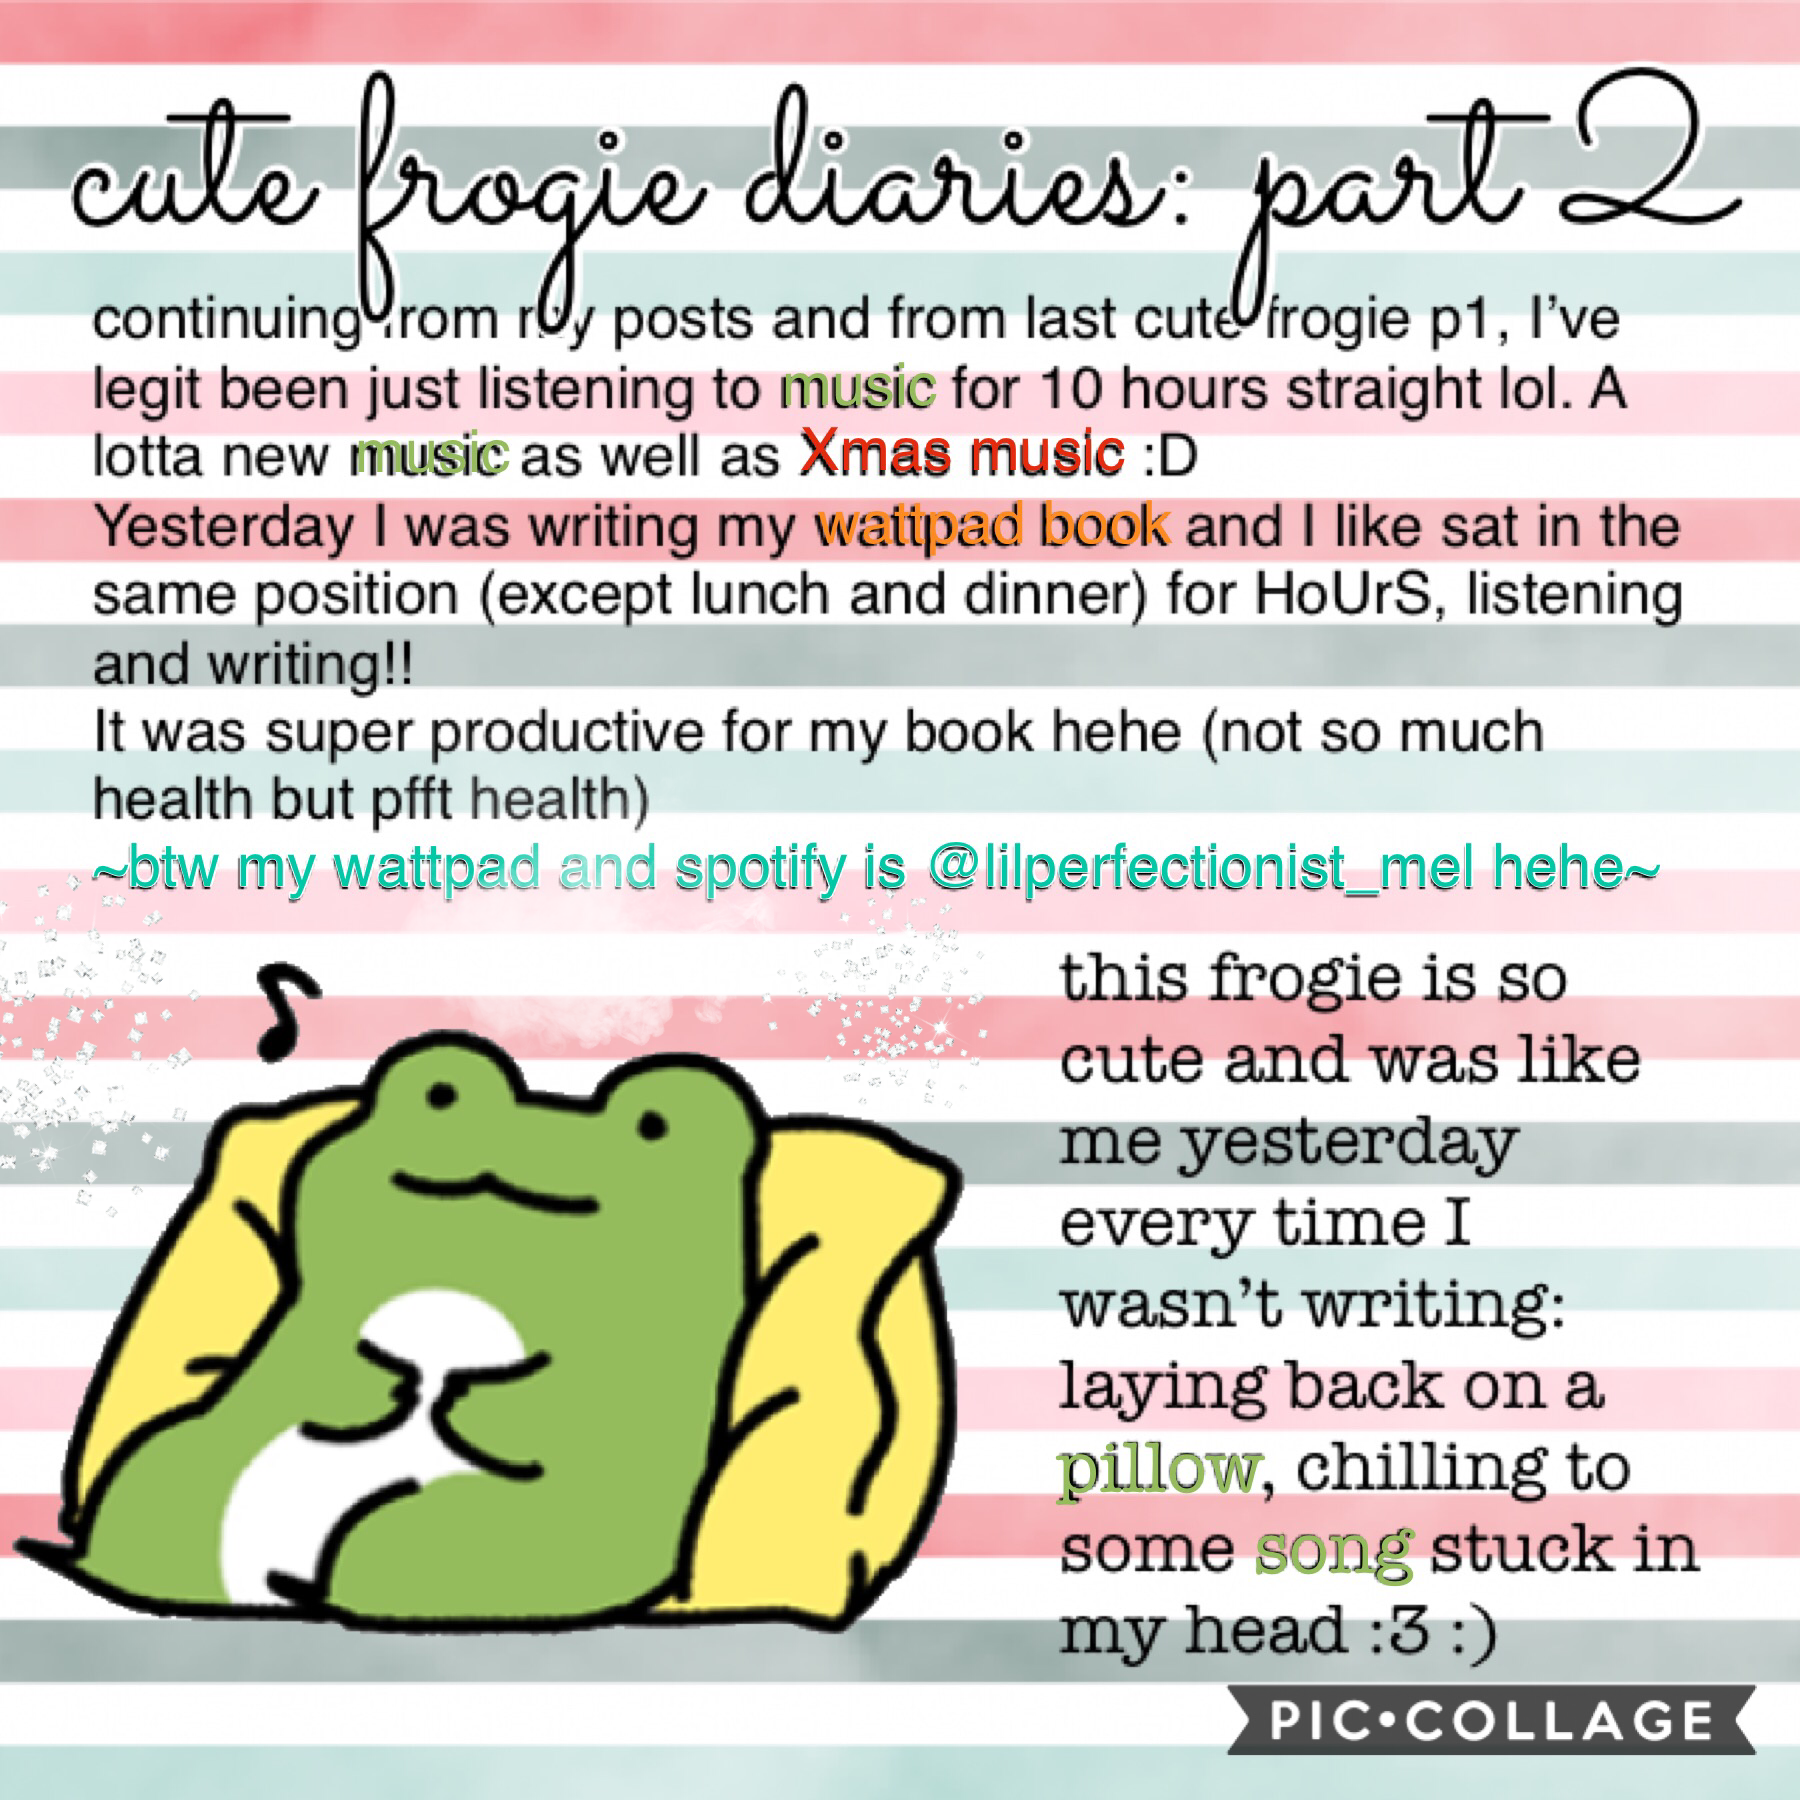 cute frogie diaries 2 🐸 
today’s vibe: music, books, and as always cute frogs doing human activities 😜🐸🎶📖 [24/12]